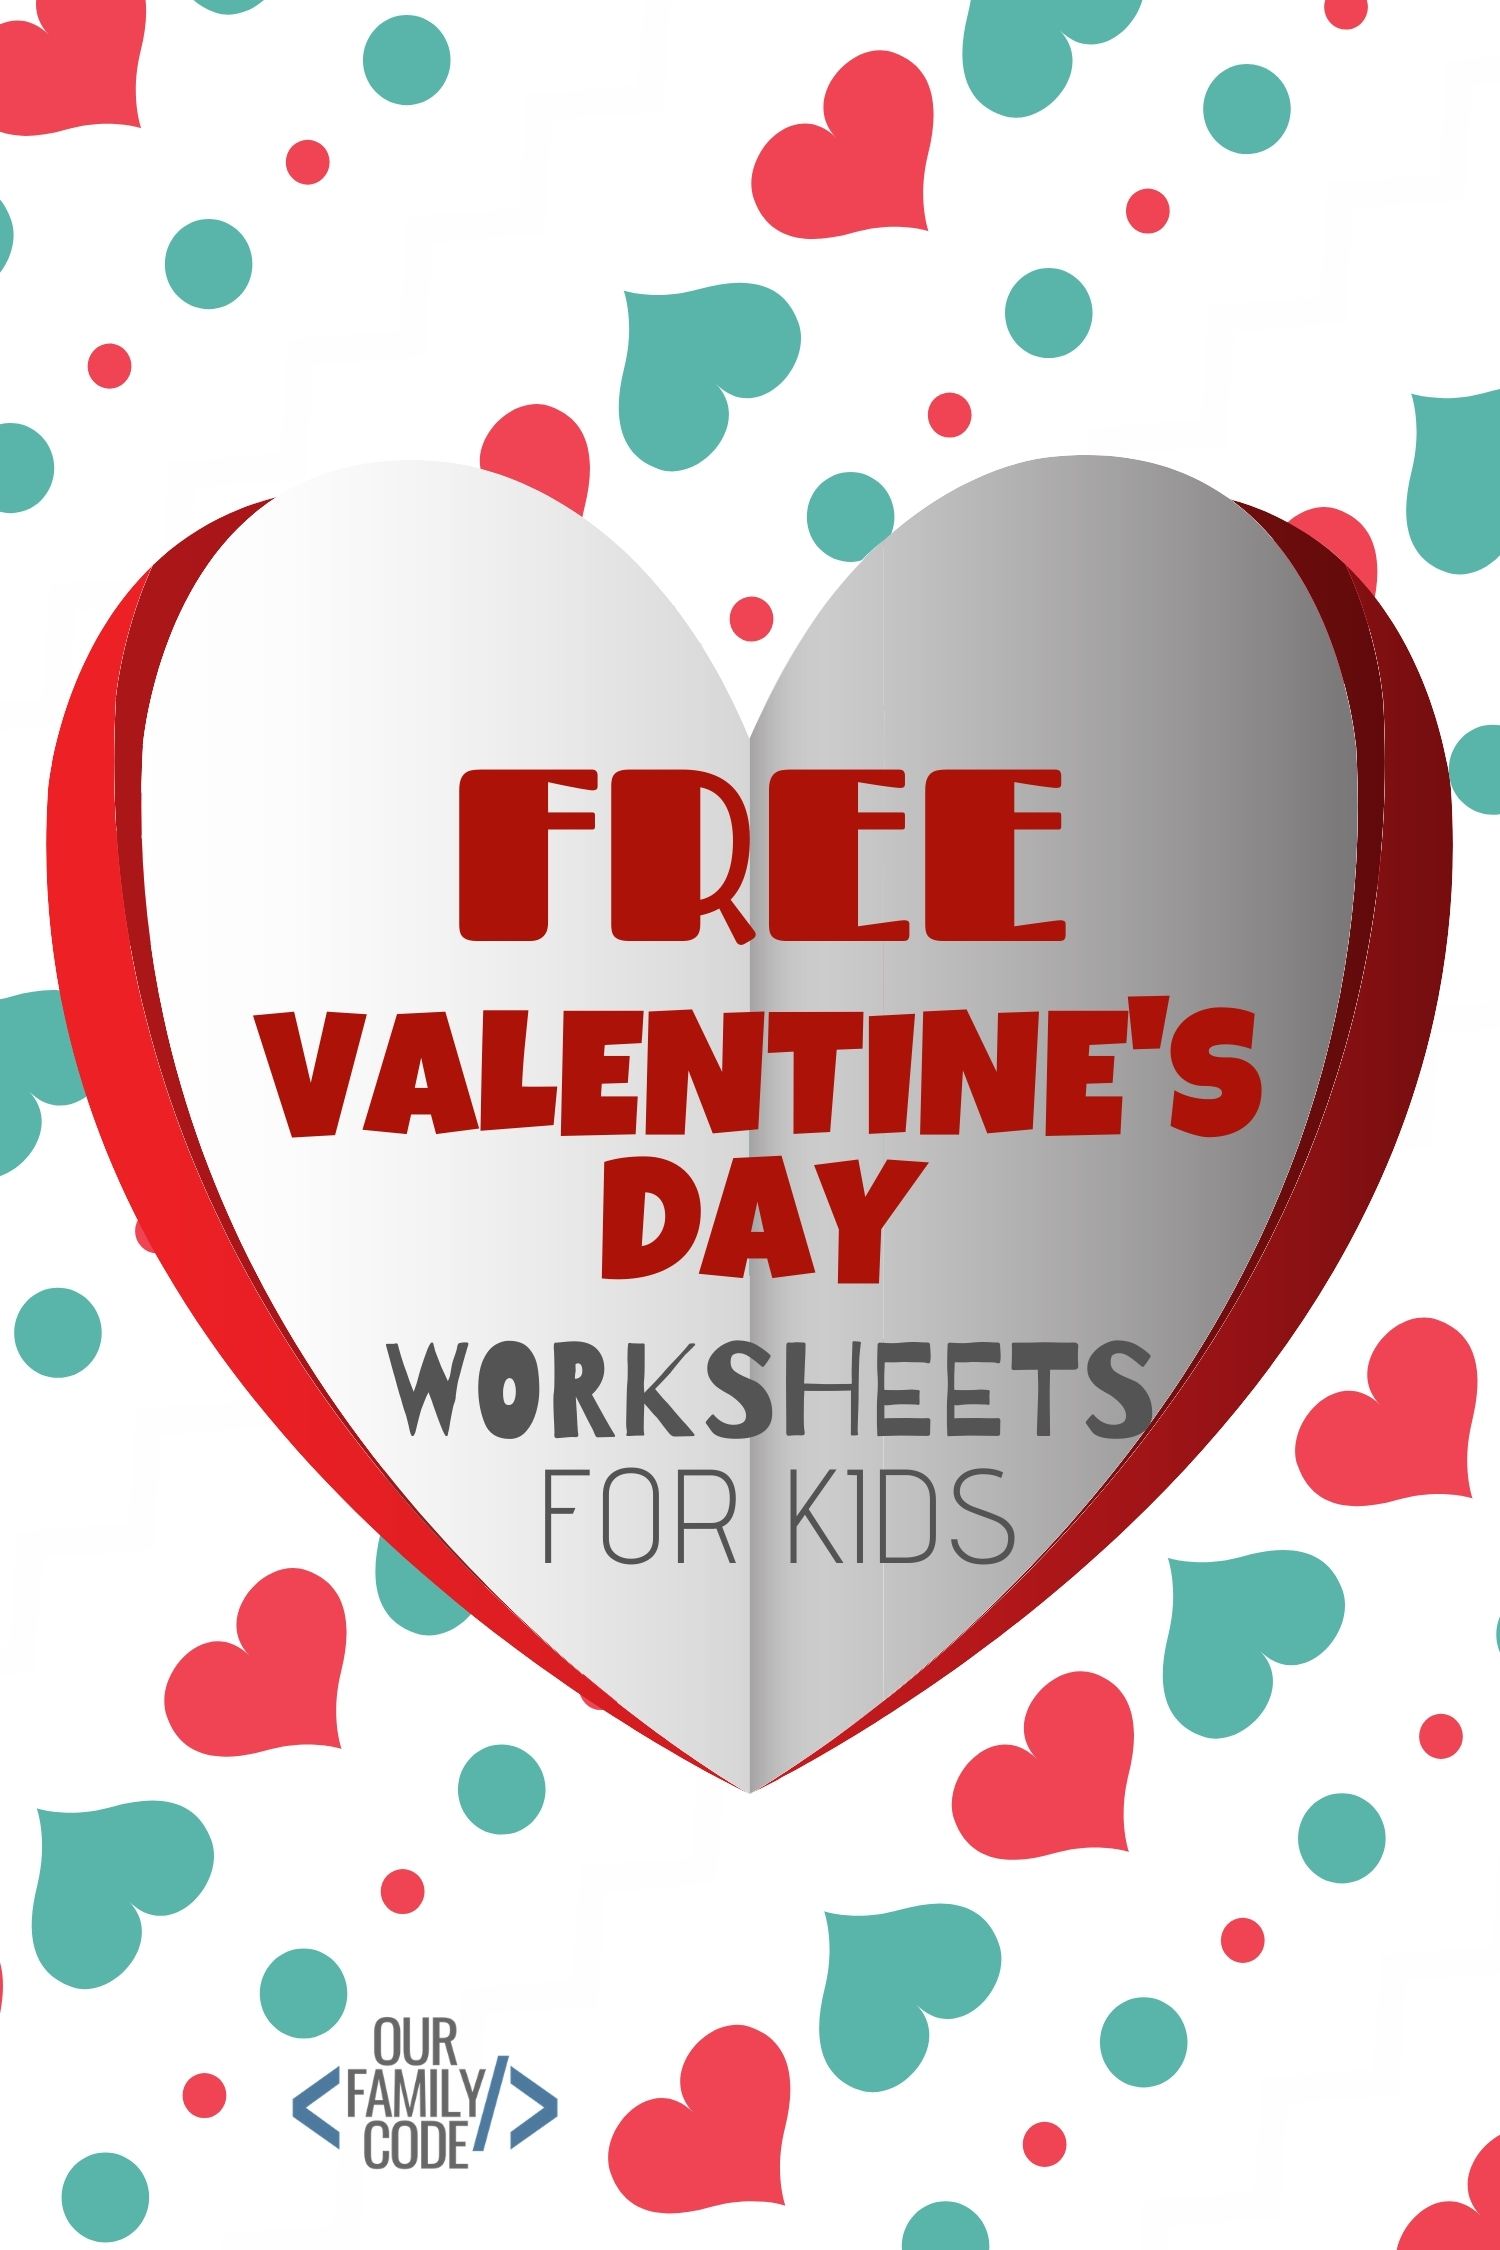 Grab these preschool Valentine's Day worksheets for kids with I-Spy, Number Recognition, Letter Recognition, and Preschool Math!